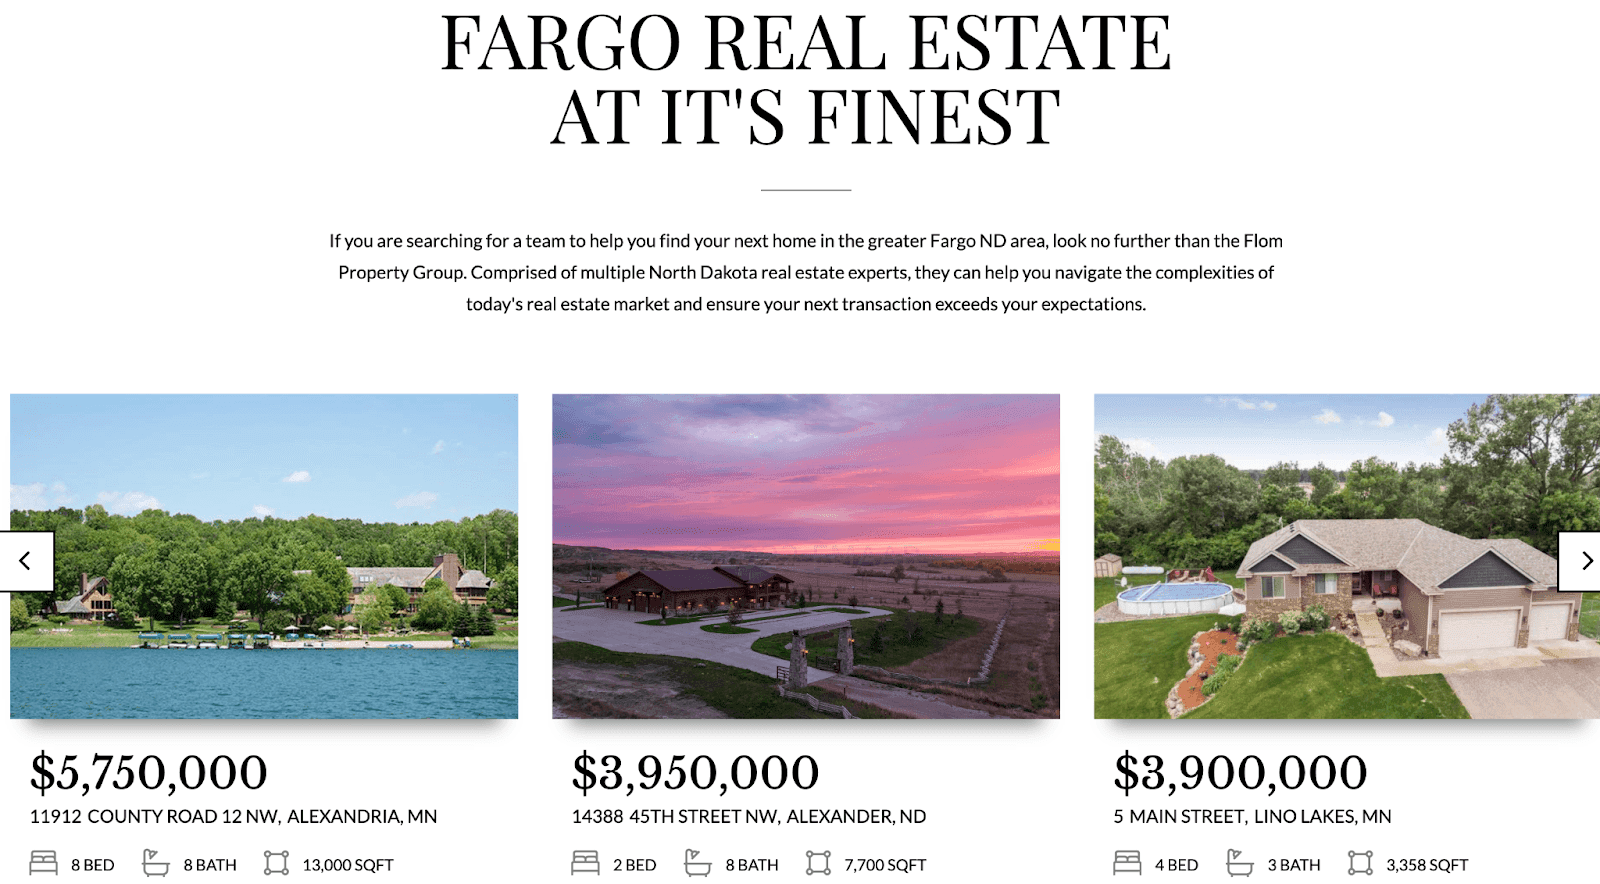 High value homes featured at the top of the landing page